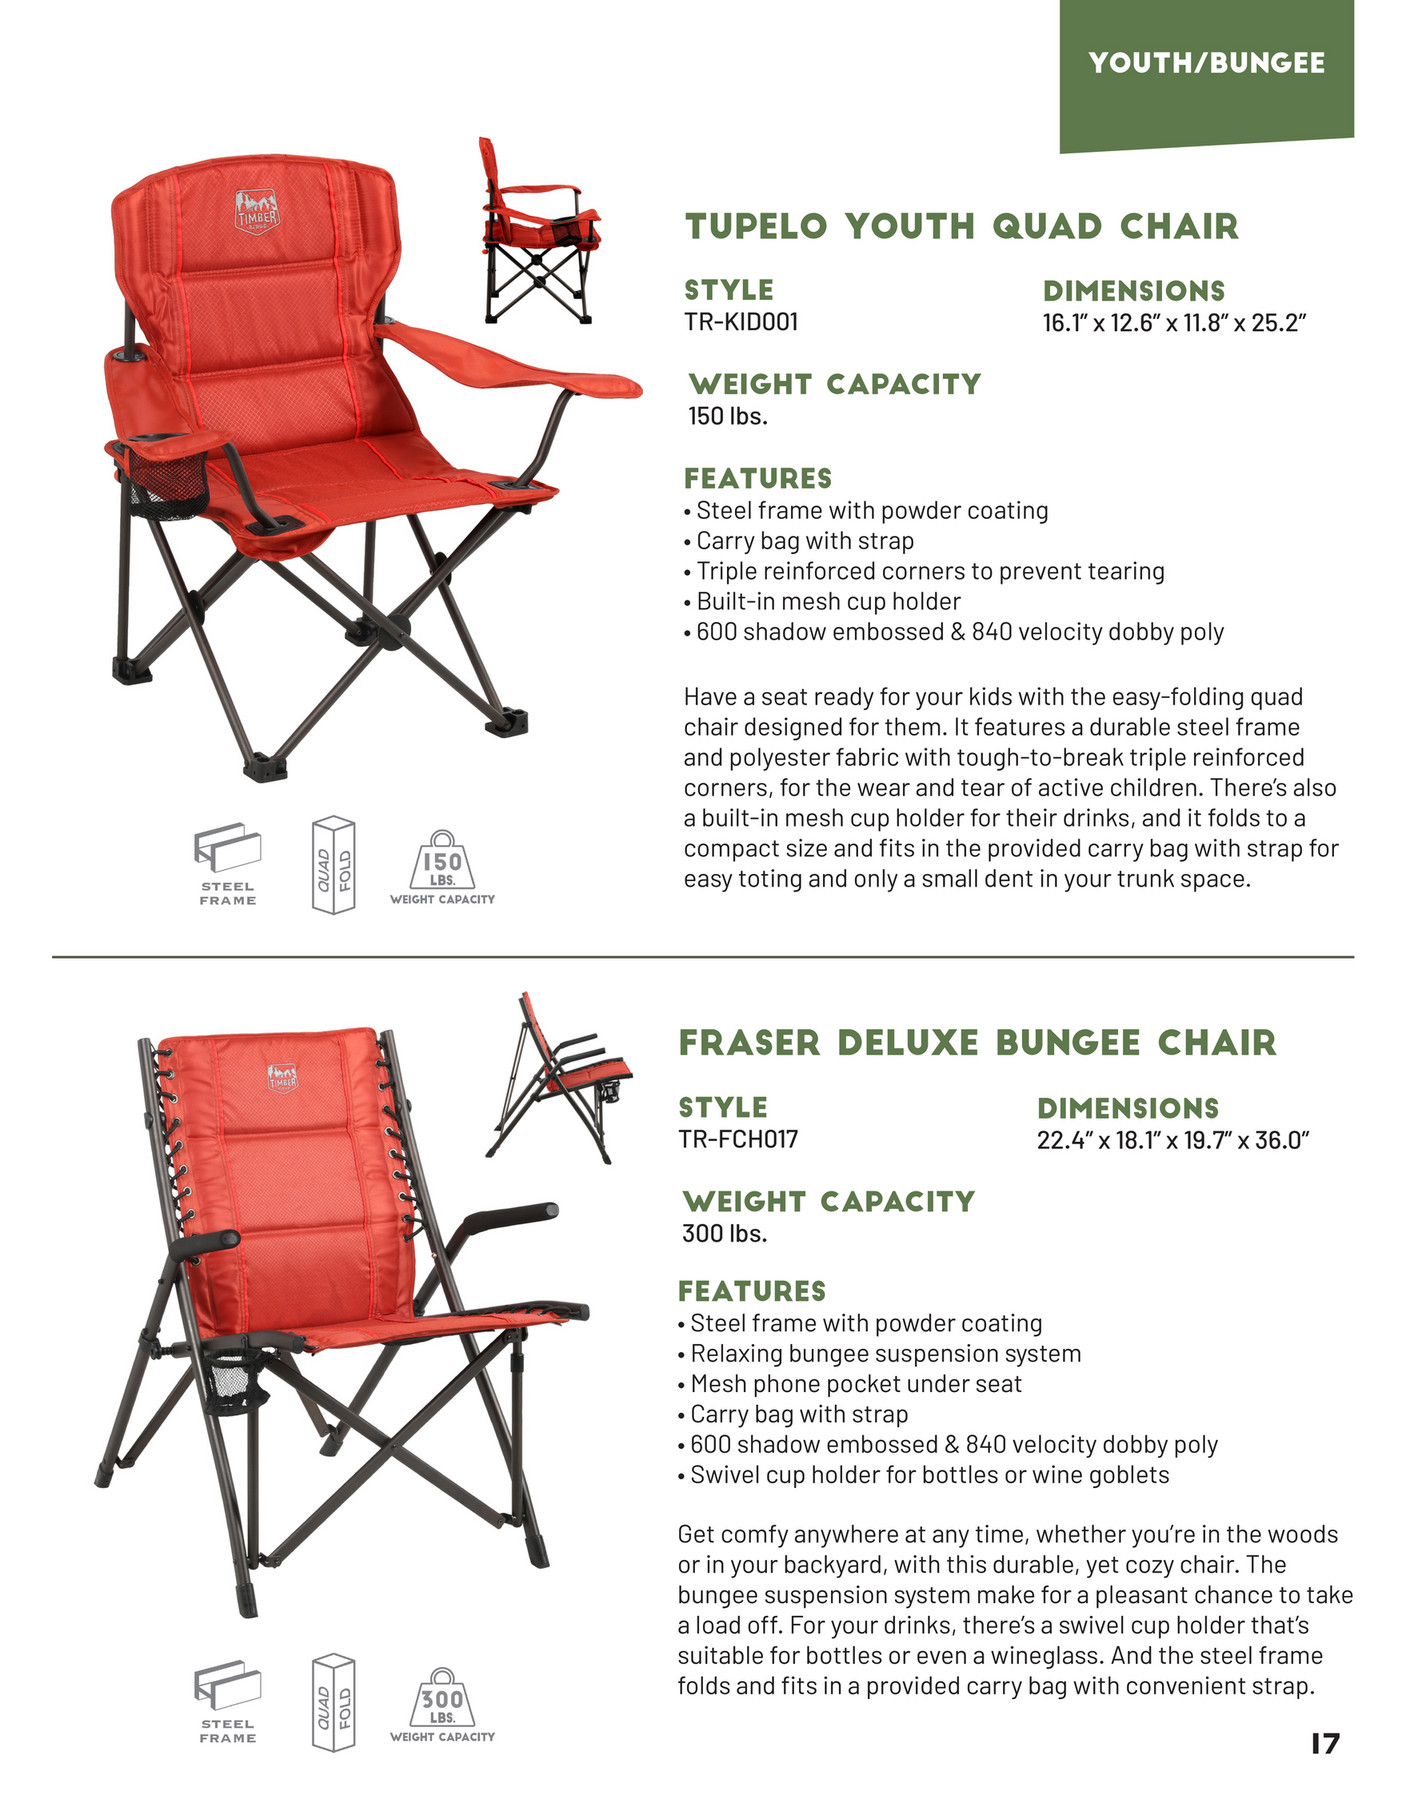 Westfield Outdoors 2019 Timber Ridge Catalog Page 16 17